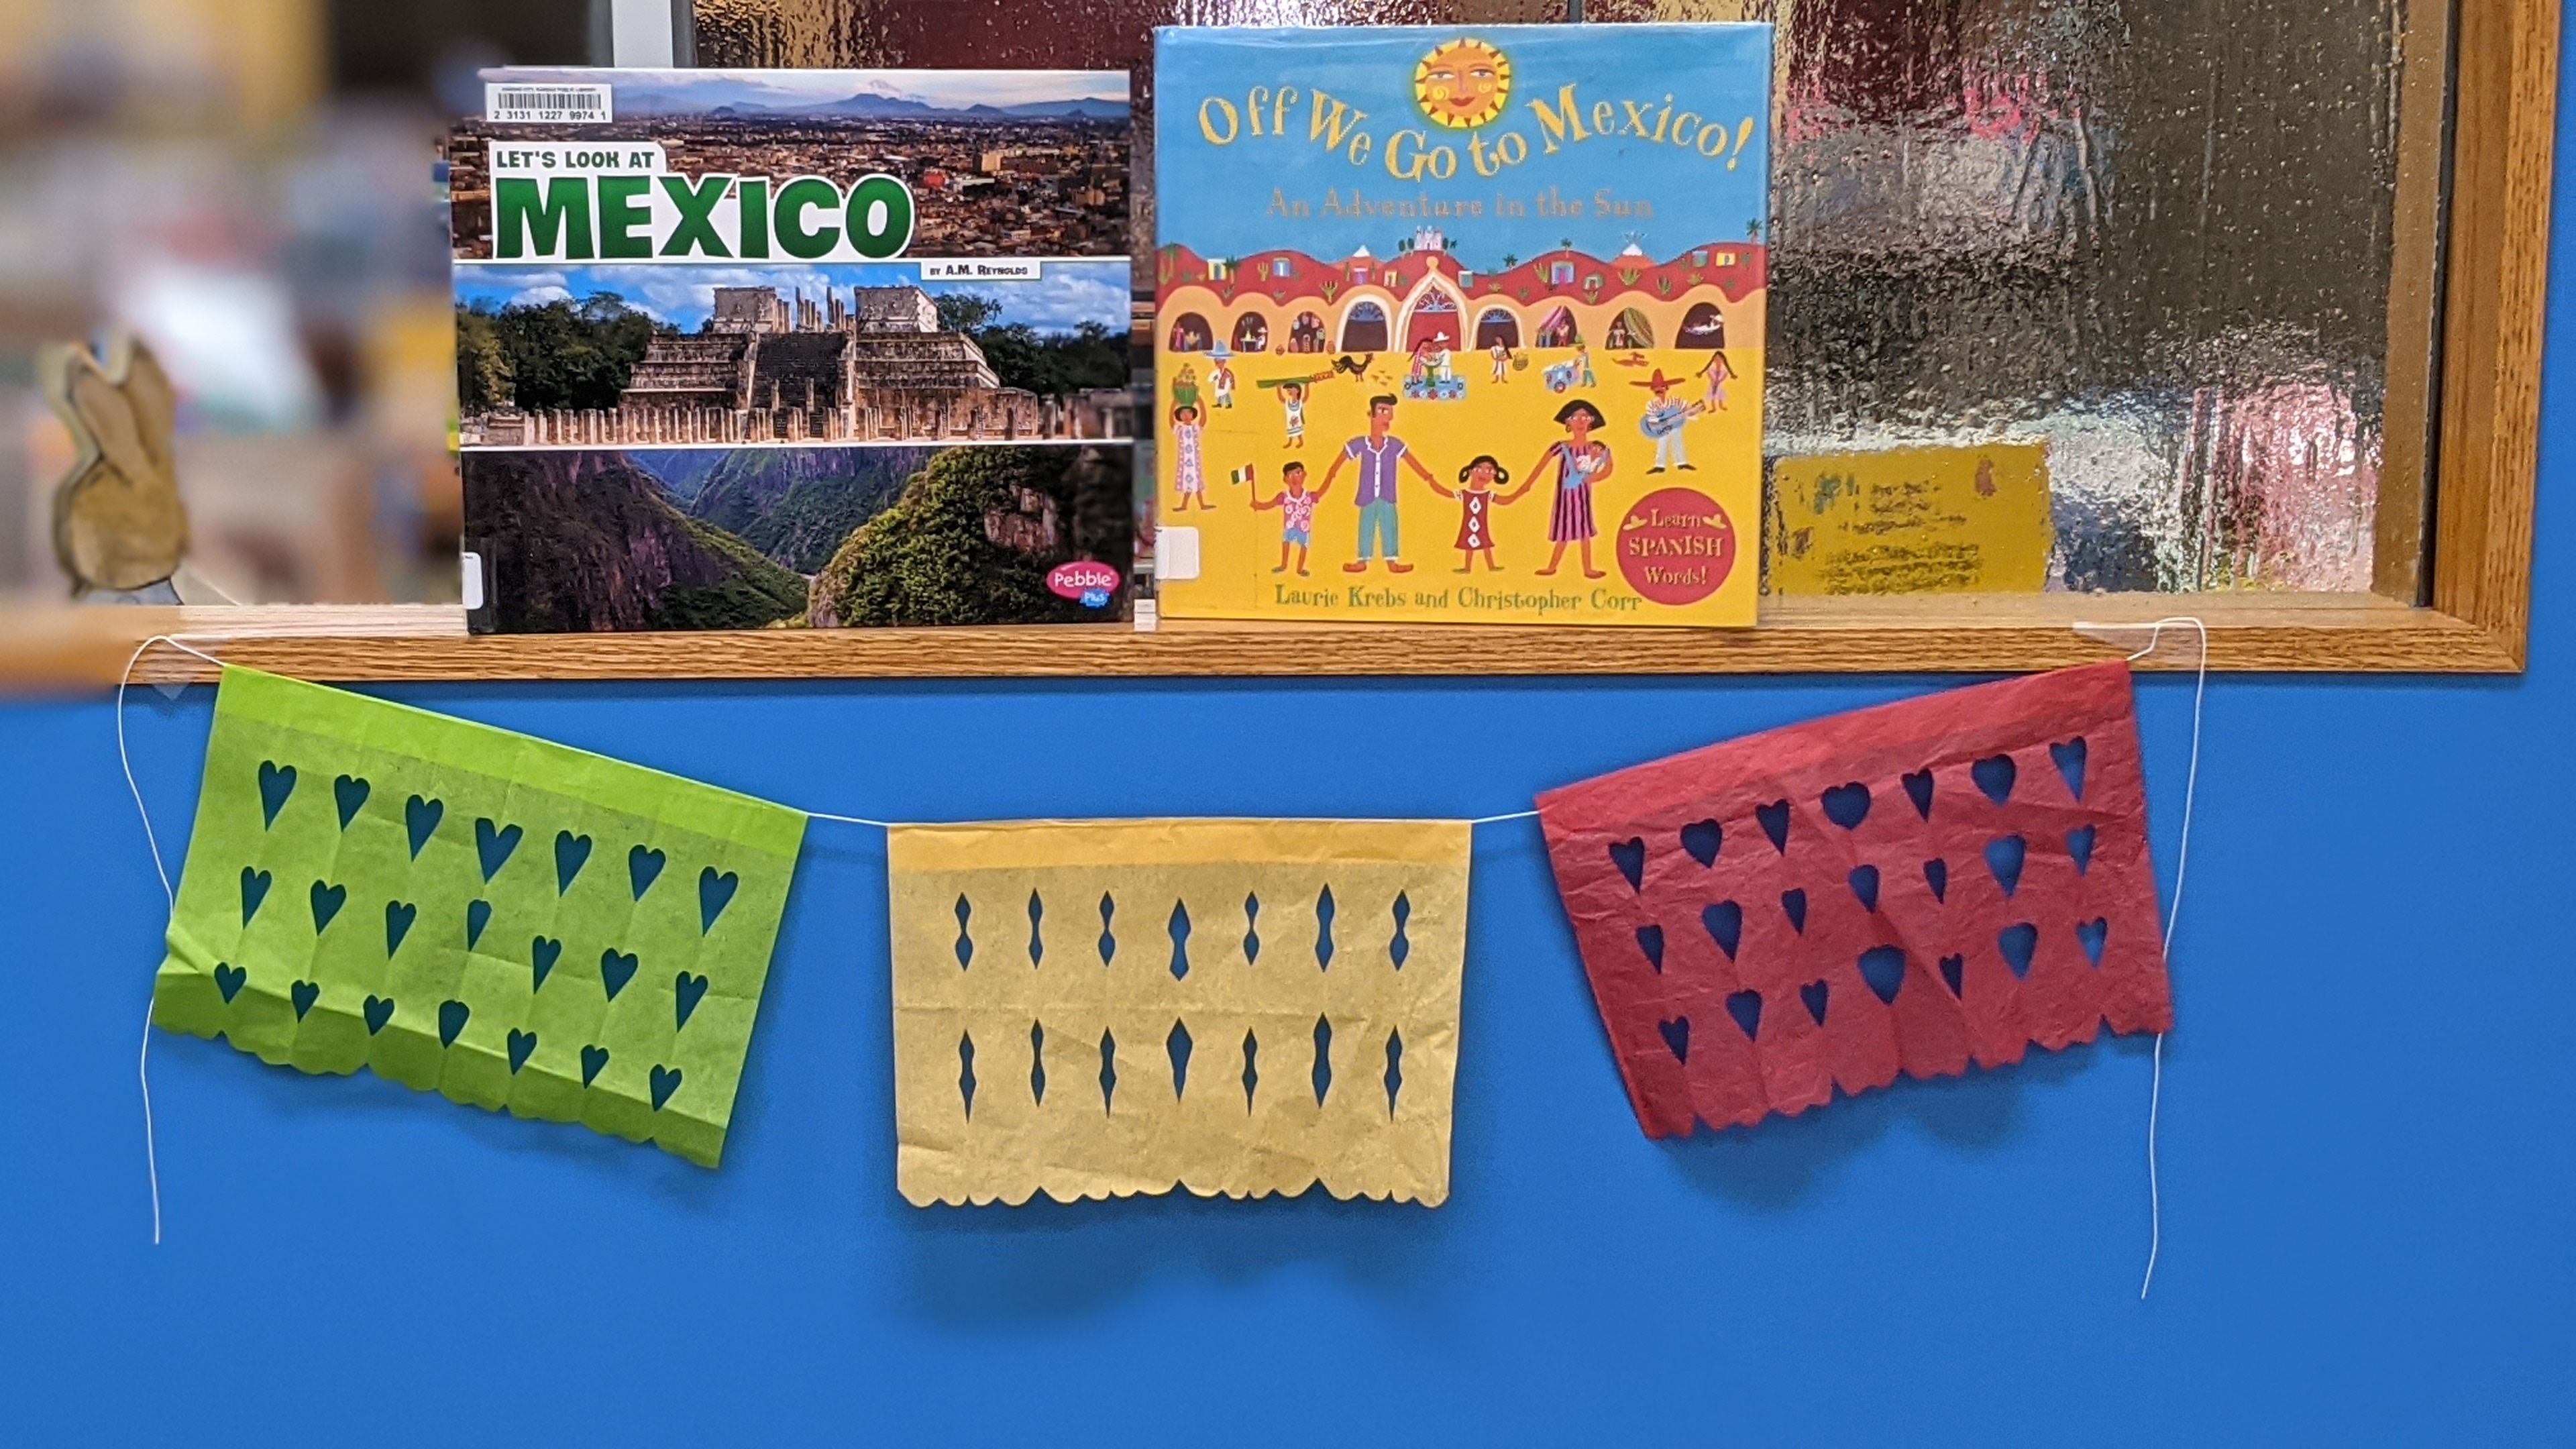 Display of books about Mexico and a papel picado banner.